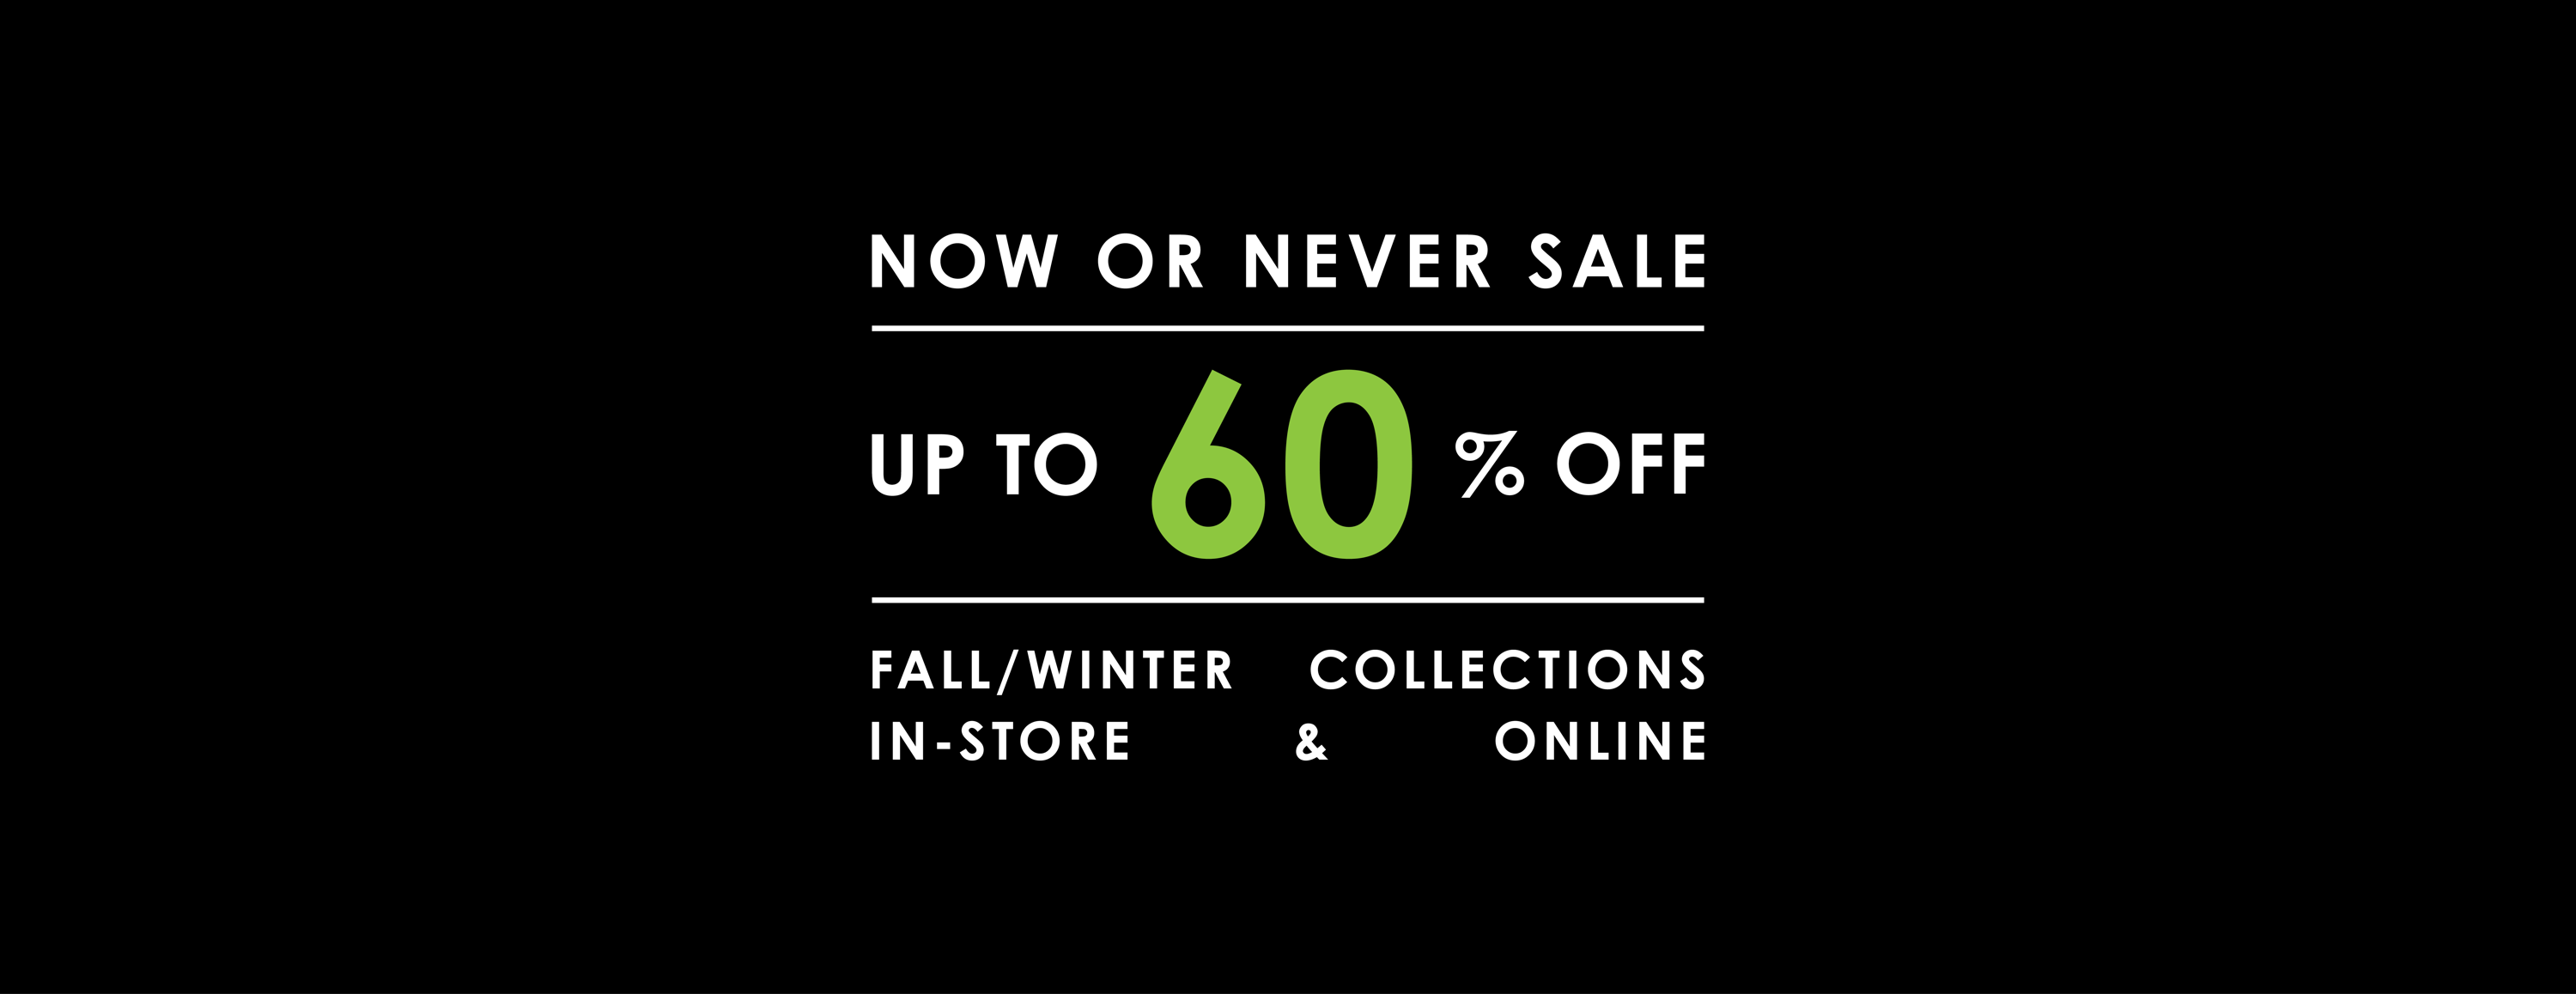 Now or Never Sale - Up to 60% Off